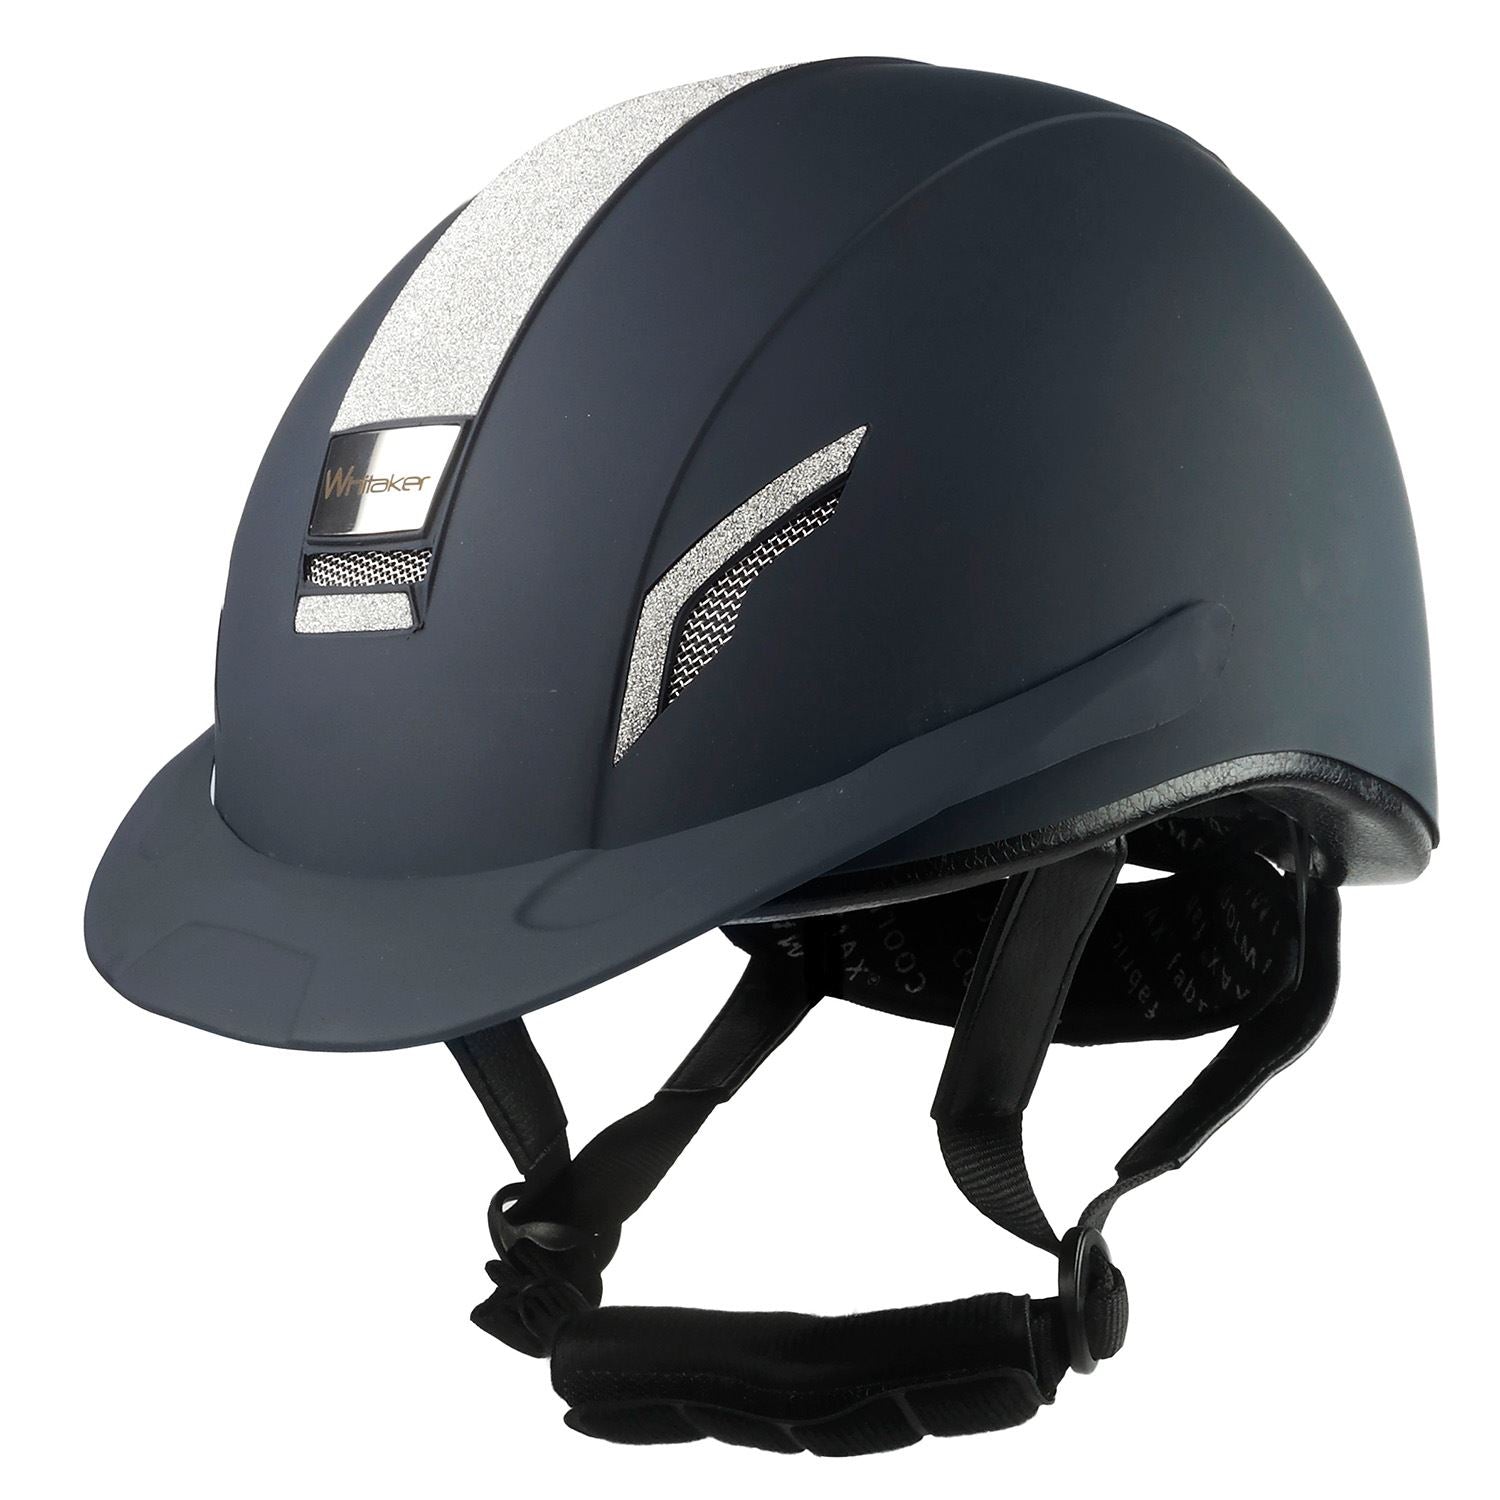 Whitaker Vx2 Sparkly Riding Helmet - Just Horse Riders